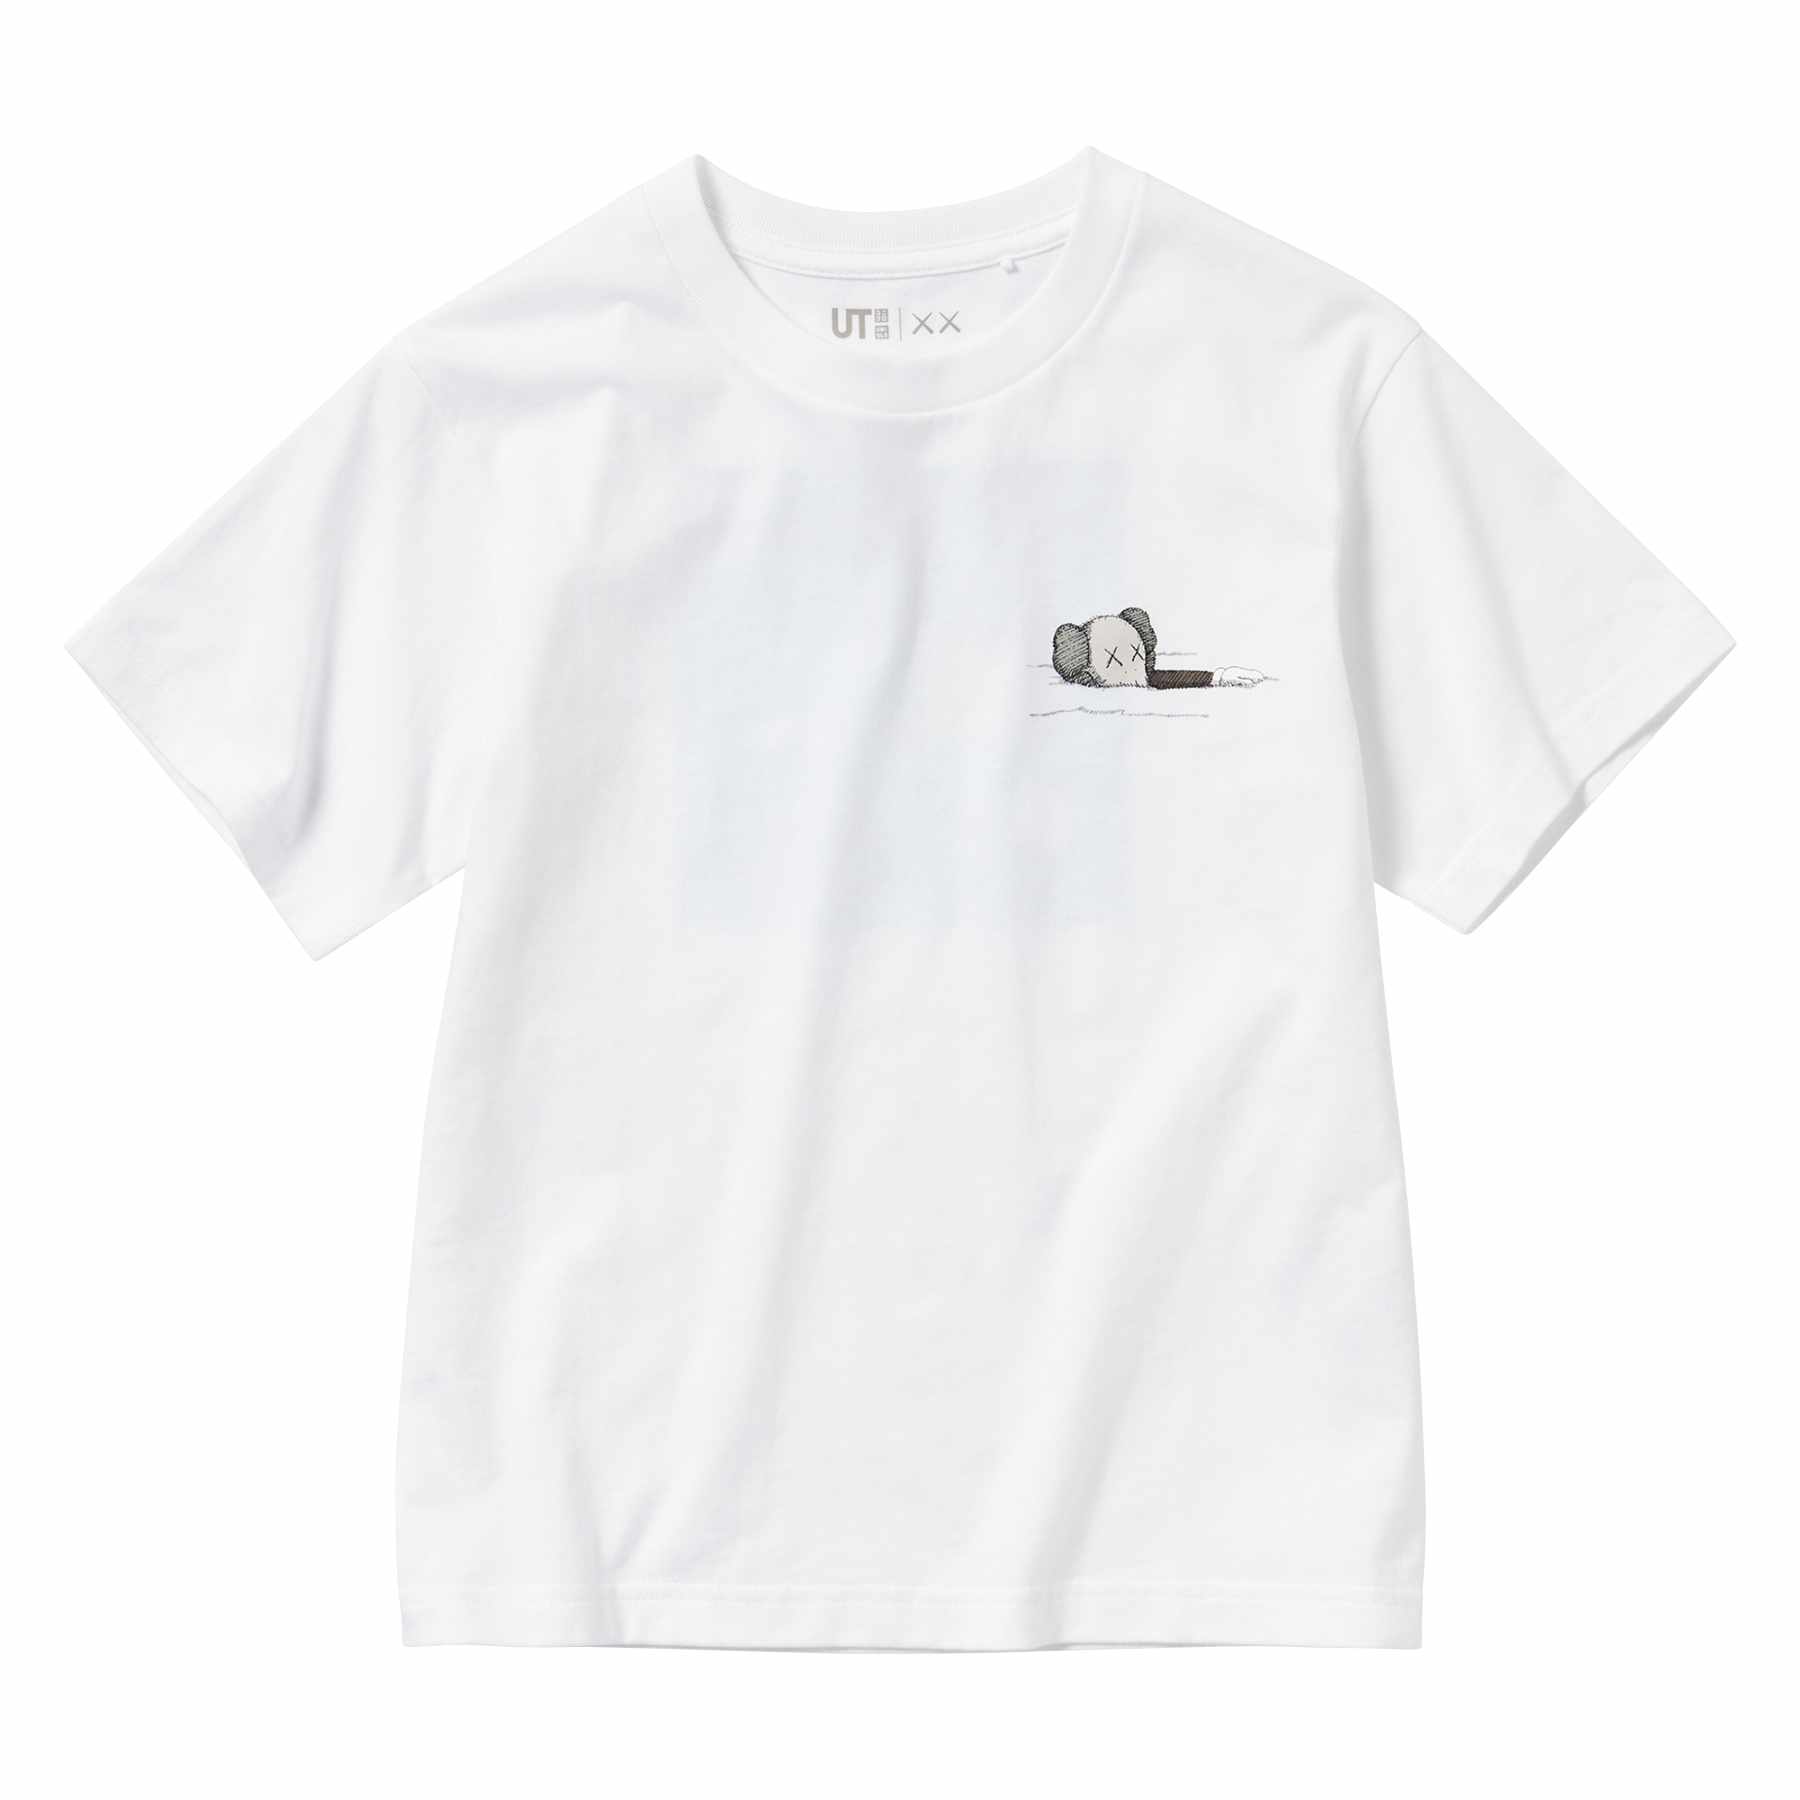 A white KAWS x UNIQLO T-shirt printed with a 'What Party" artwork